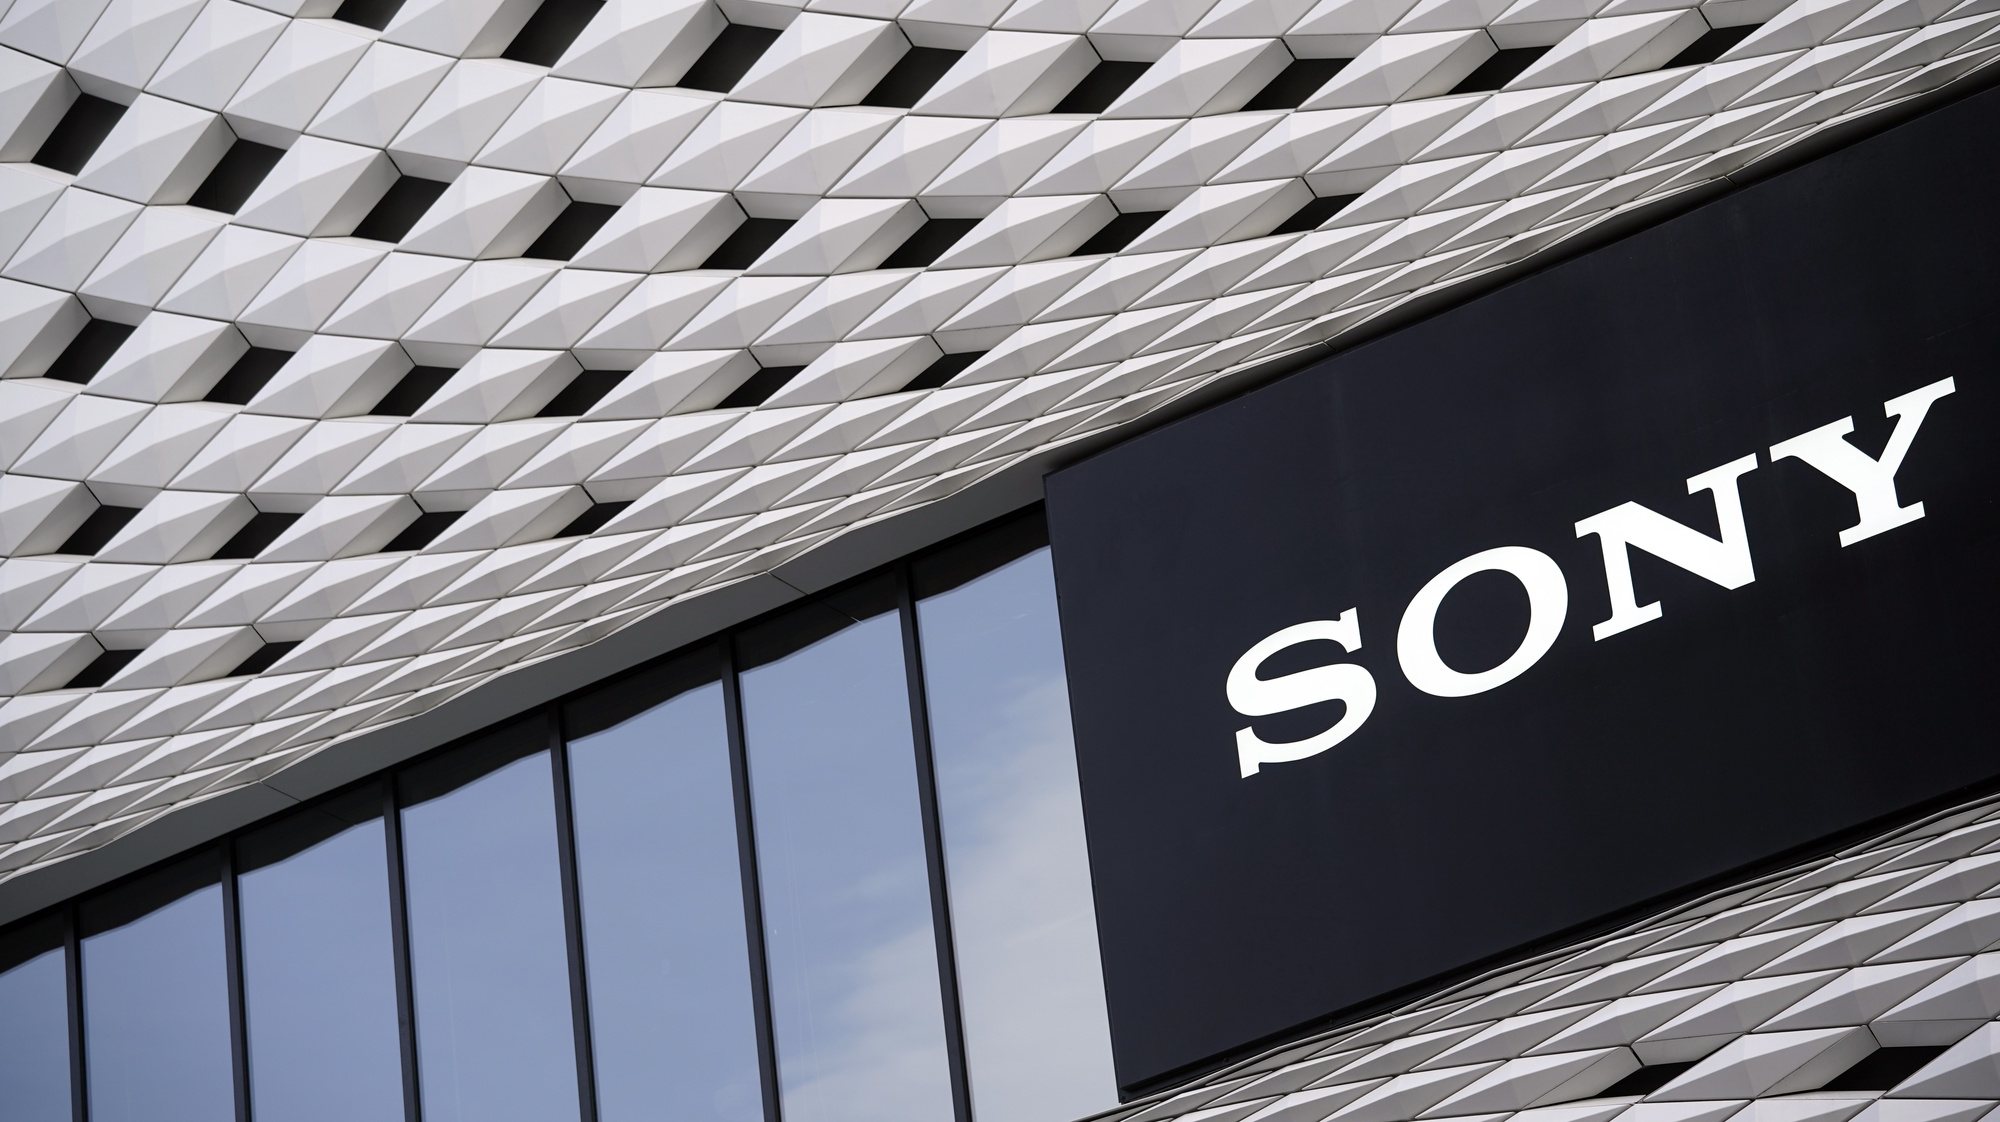 epa09722545 (FILE) - The Sony logo is seen on a building in Tokyo, Japan, 28 April 2021 (reissued 02 February 2022). On 02 February 2022, Sony Group announced its net profit fell by 19.9 per cent during the April to December 2021 period.  EPA/FRANCK ROBICHON